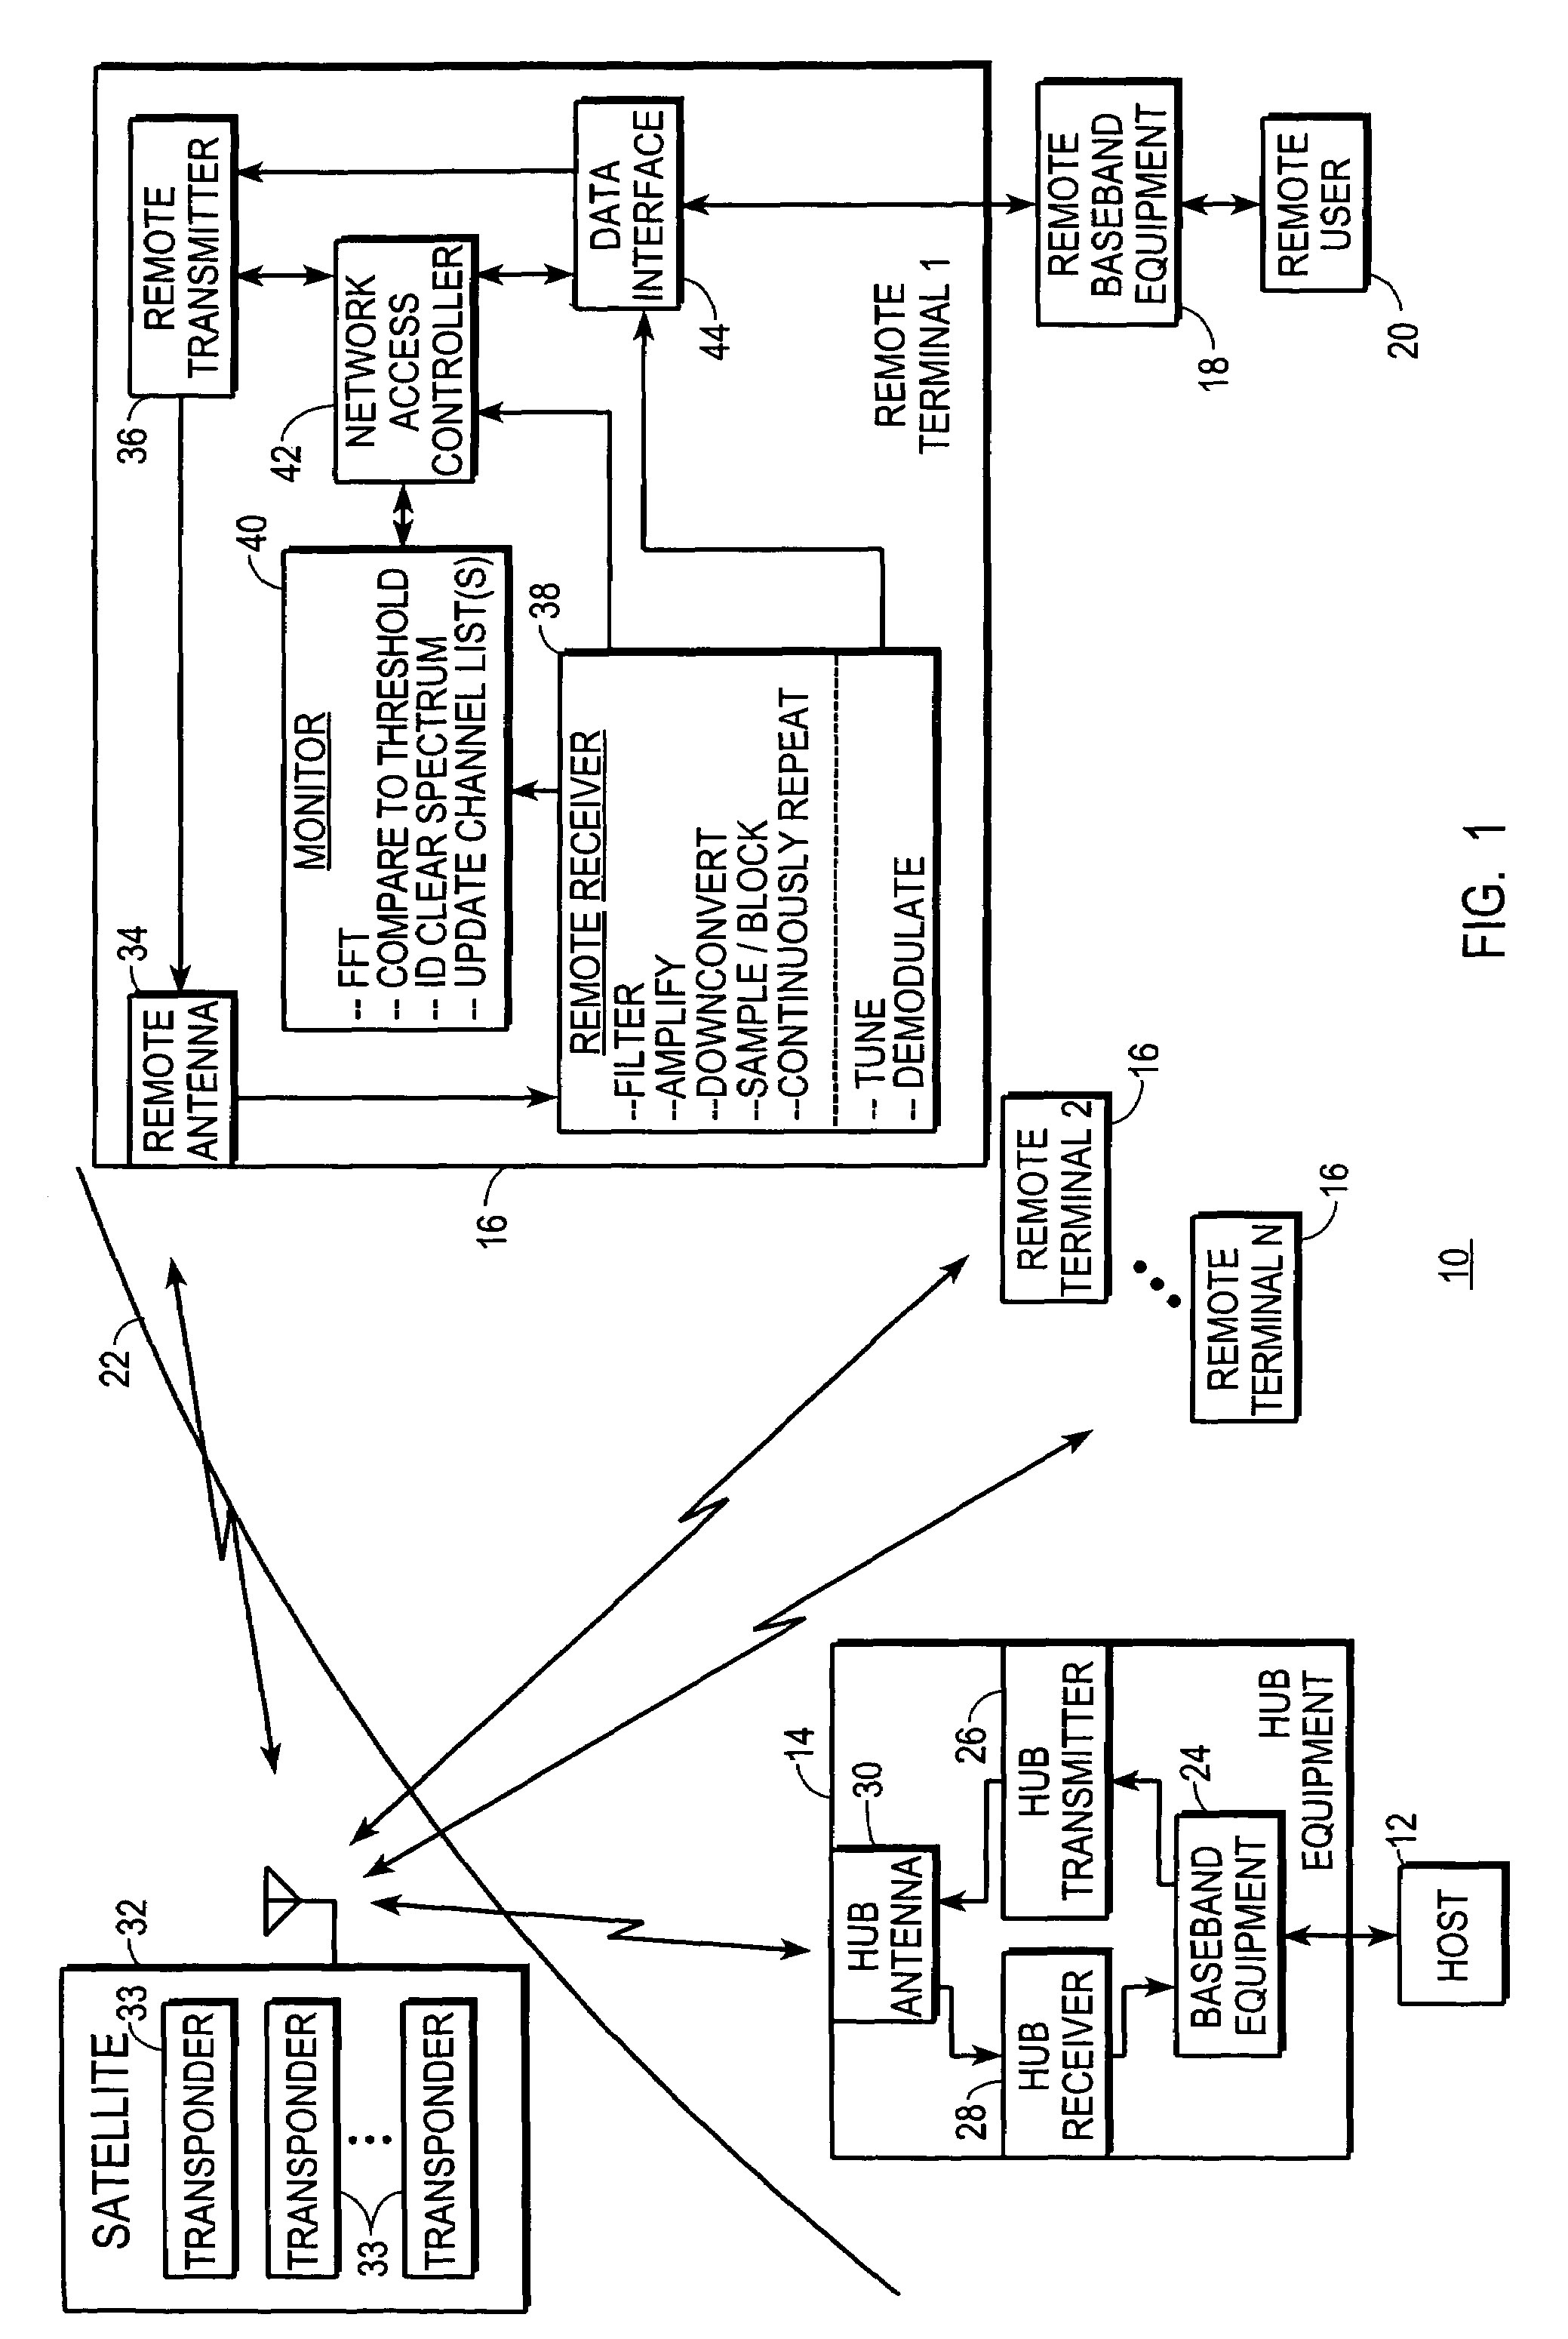 System and method for multiple access control in satellite communications system